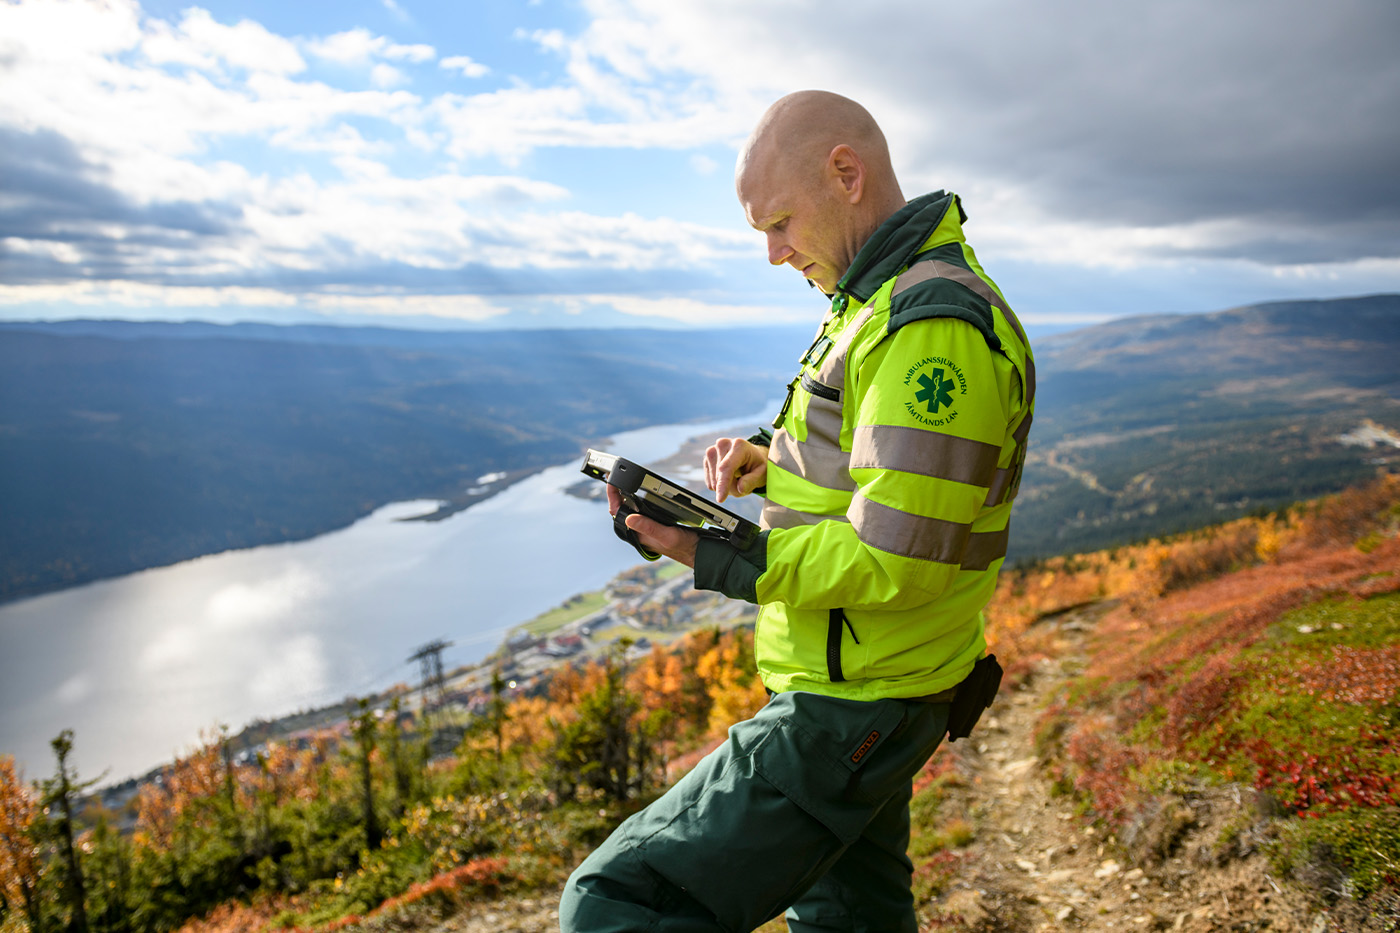 Ortivus awarded 10.5 MSEK contract from Region Norrbotten for MobiMed ePR